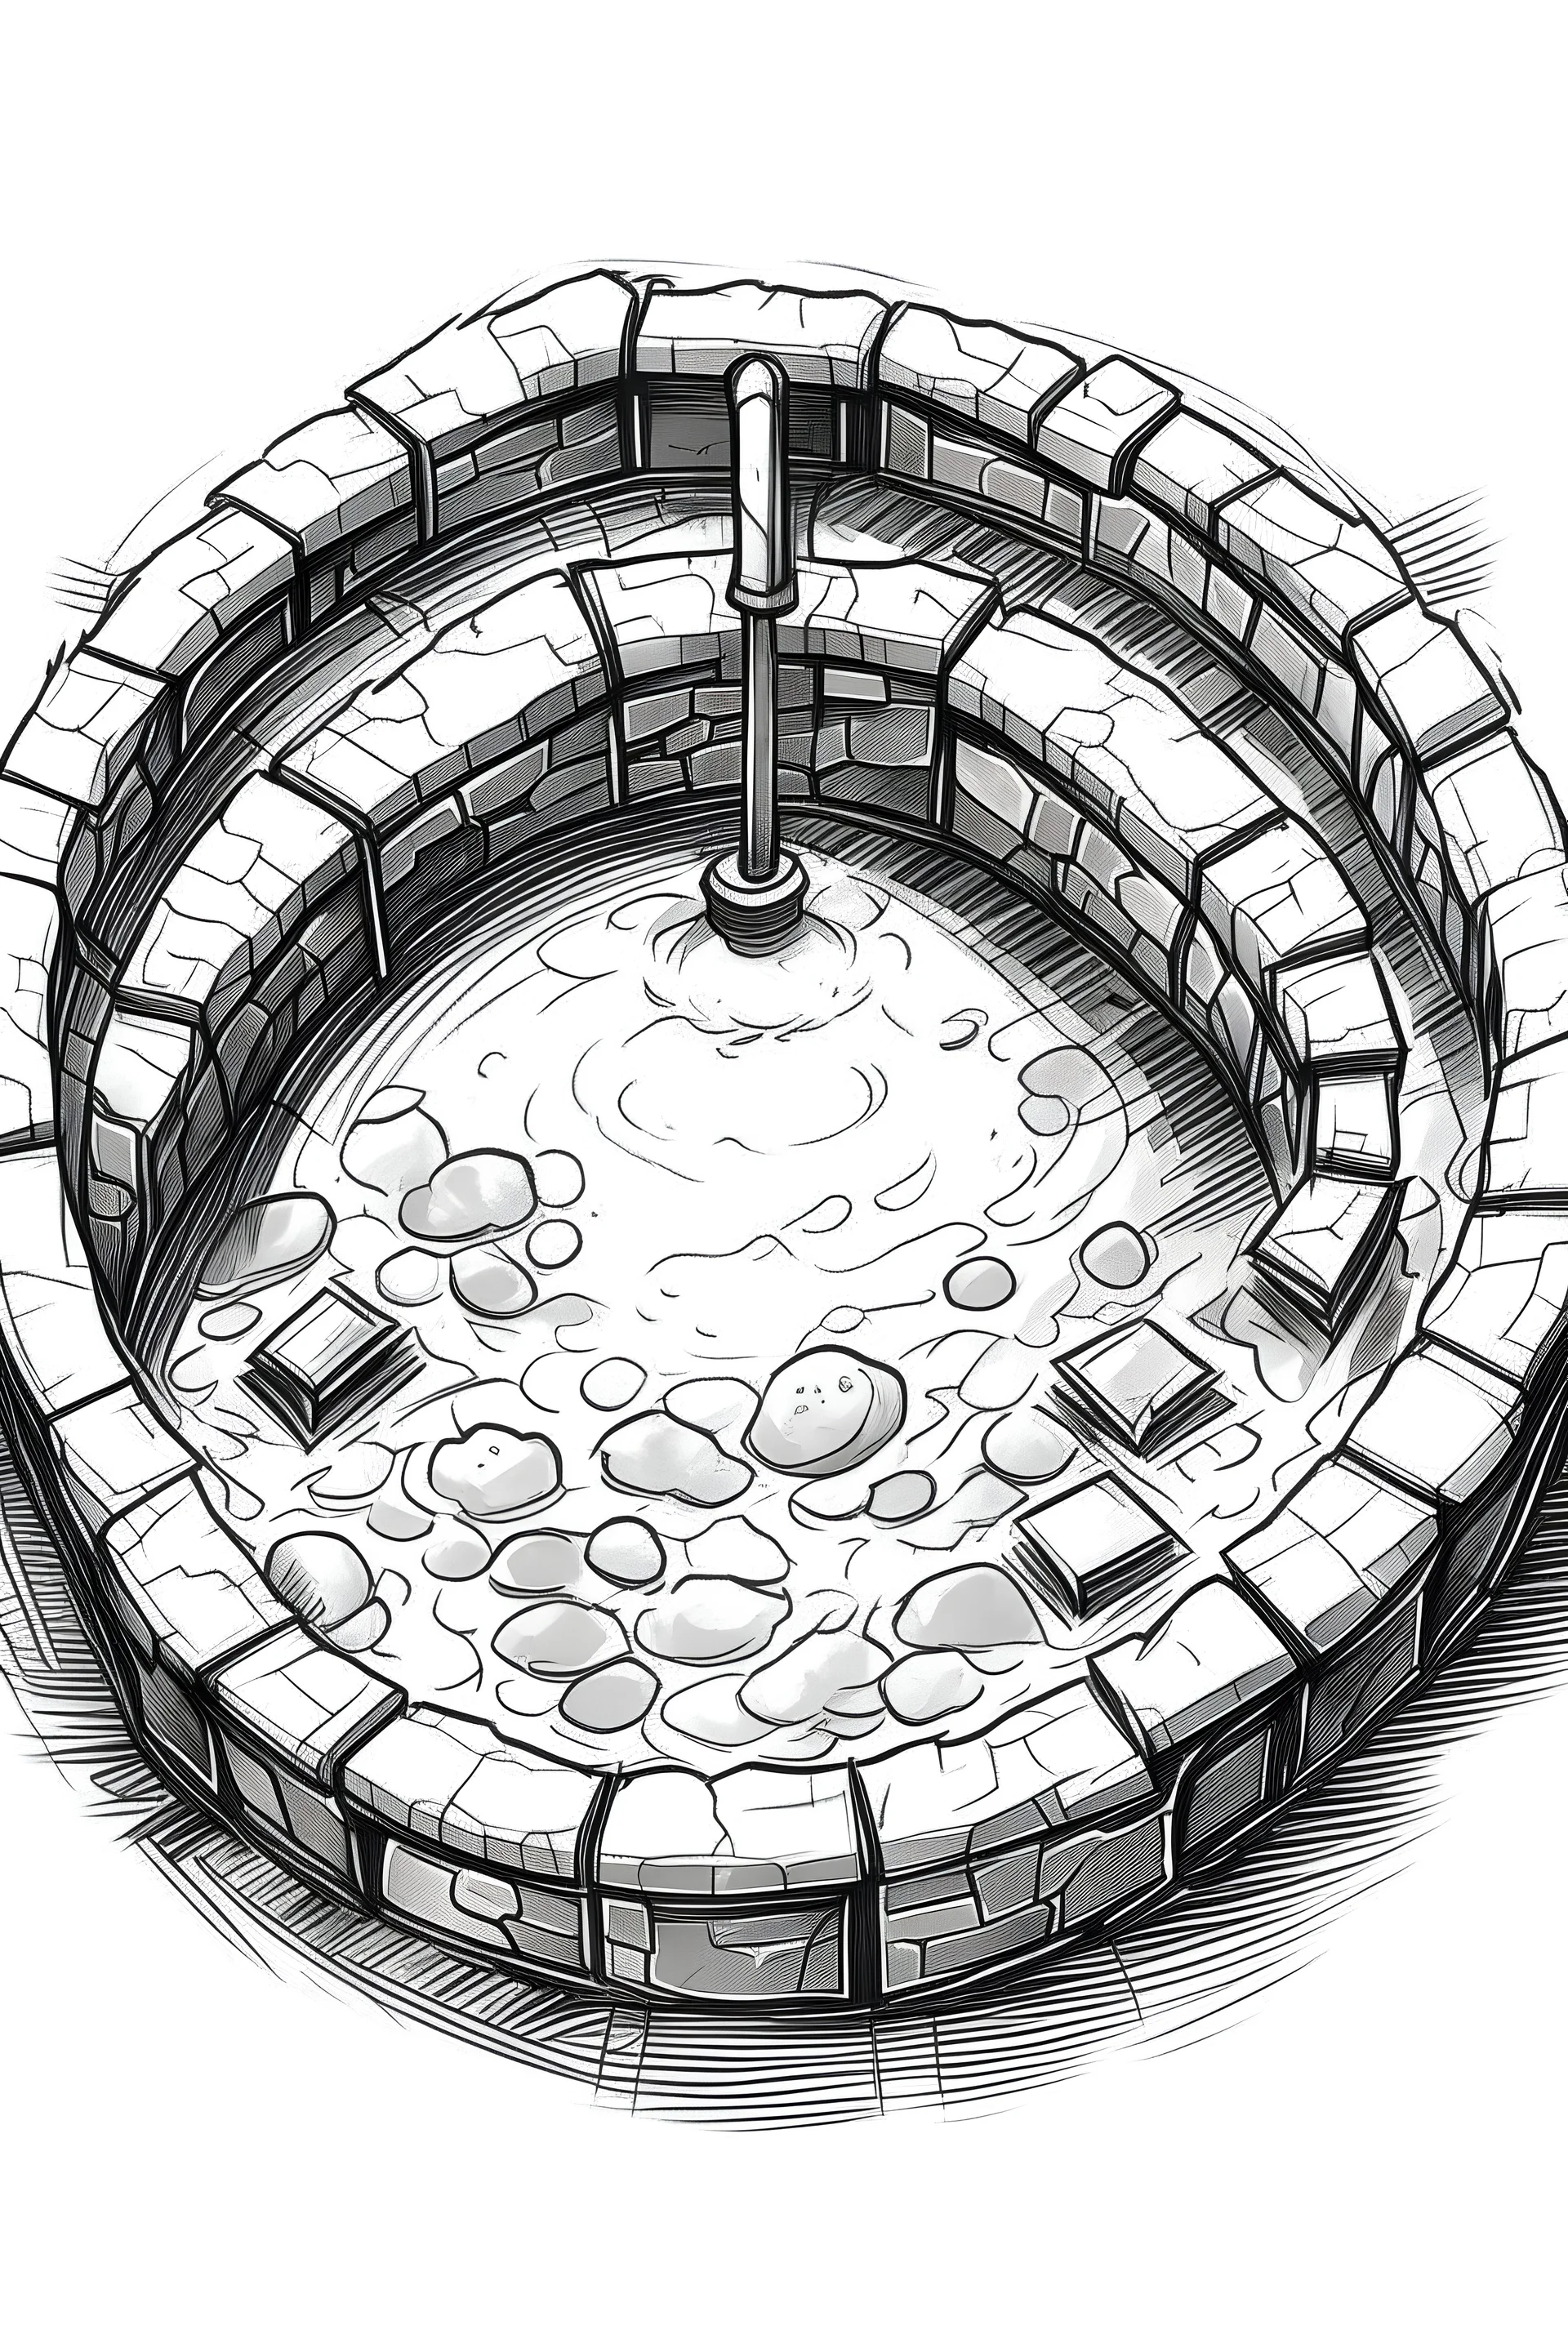 A drawing of an old Stone well in a Crypt dungeon. White Eels swimming in the wells water. Sketch drawing. Top down View.